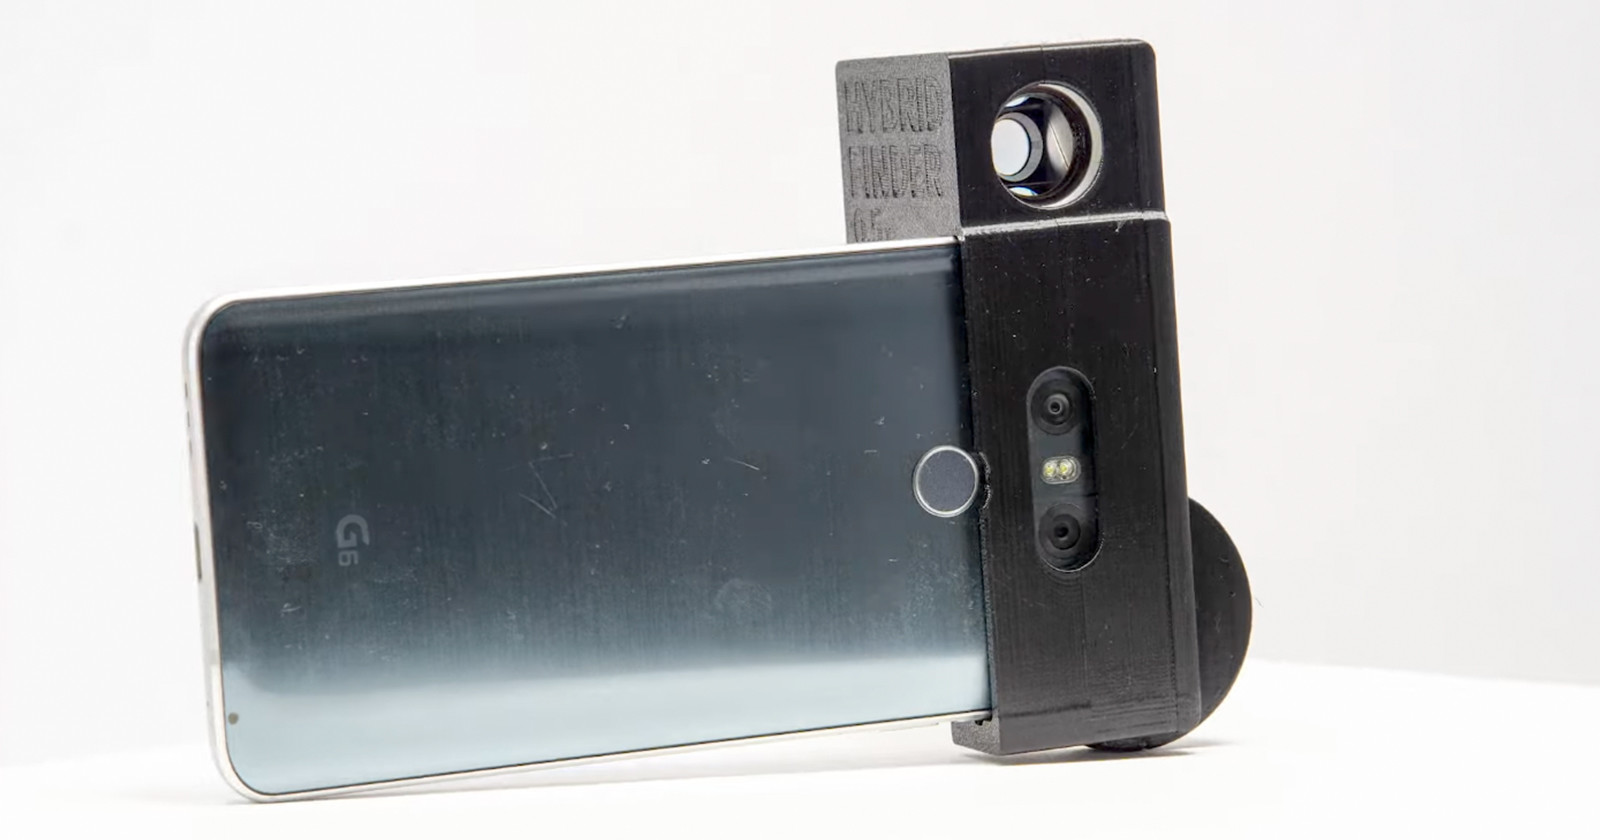 Photographer Builds Hybrid Viewfinder with Digital Overlay for Smartphones